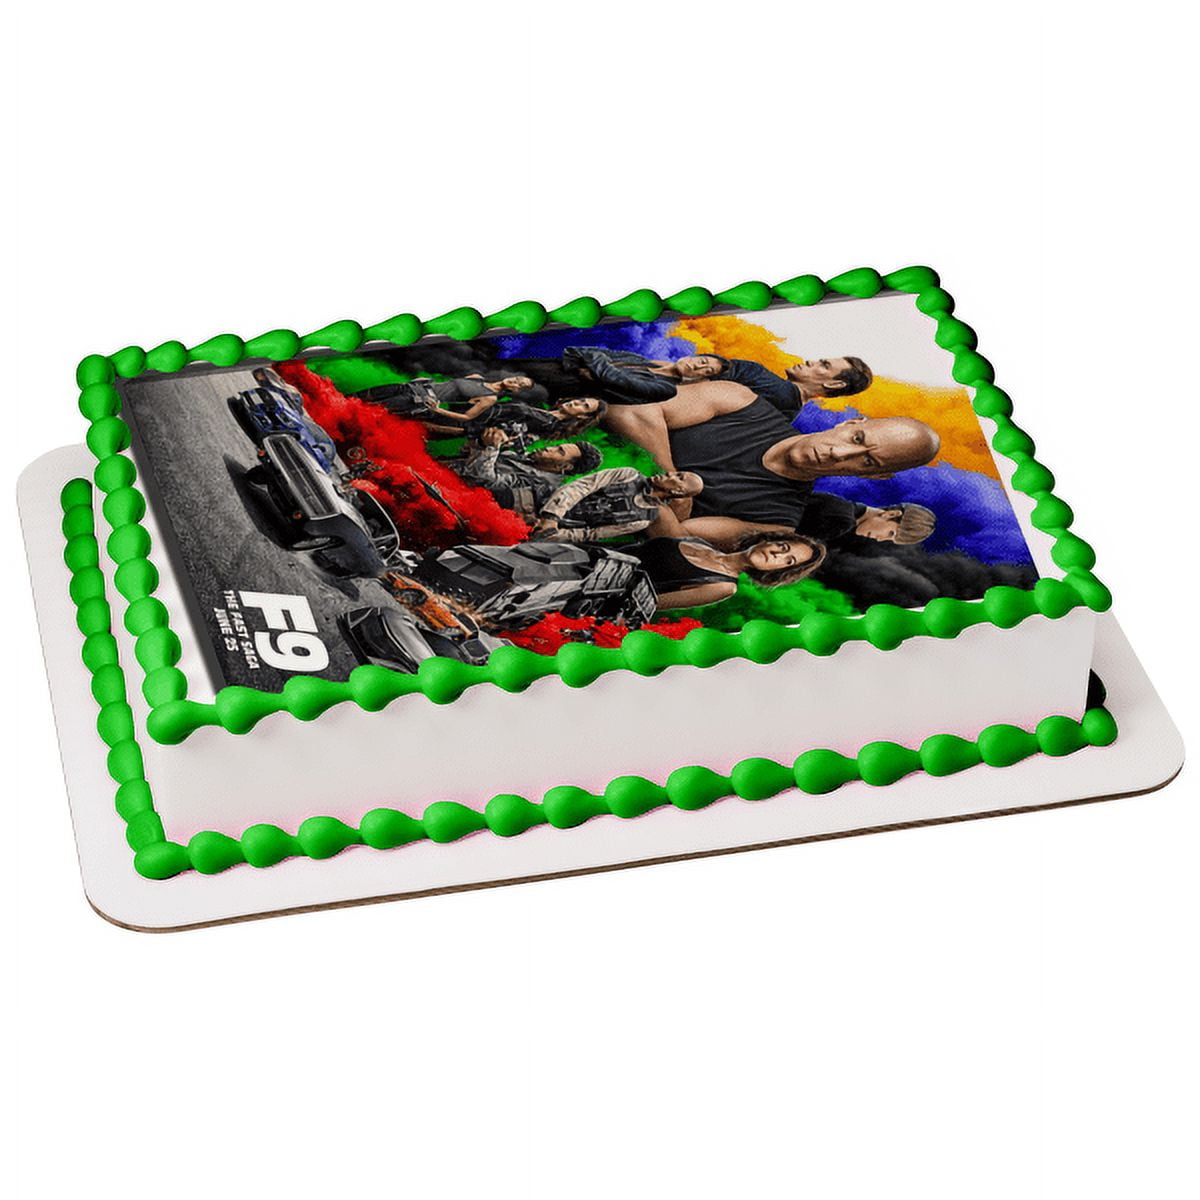 Fortnite PERSONALISED PRINTED EDIBLE BIRTHDAY CAKE TOPPER DECORATION